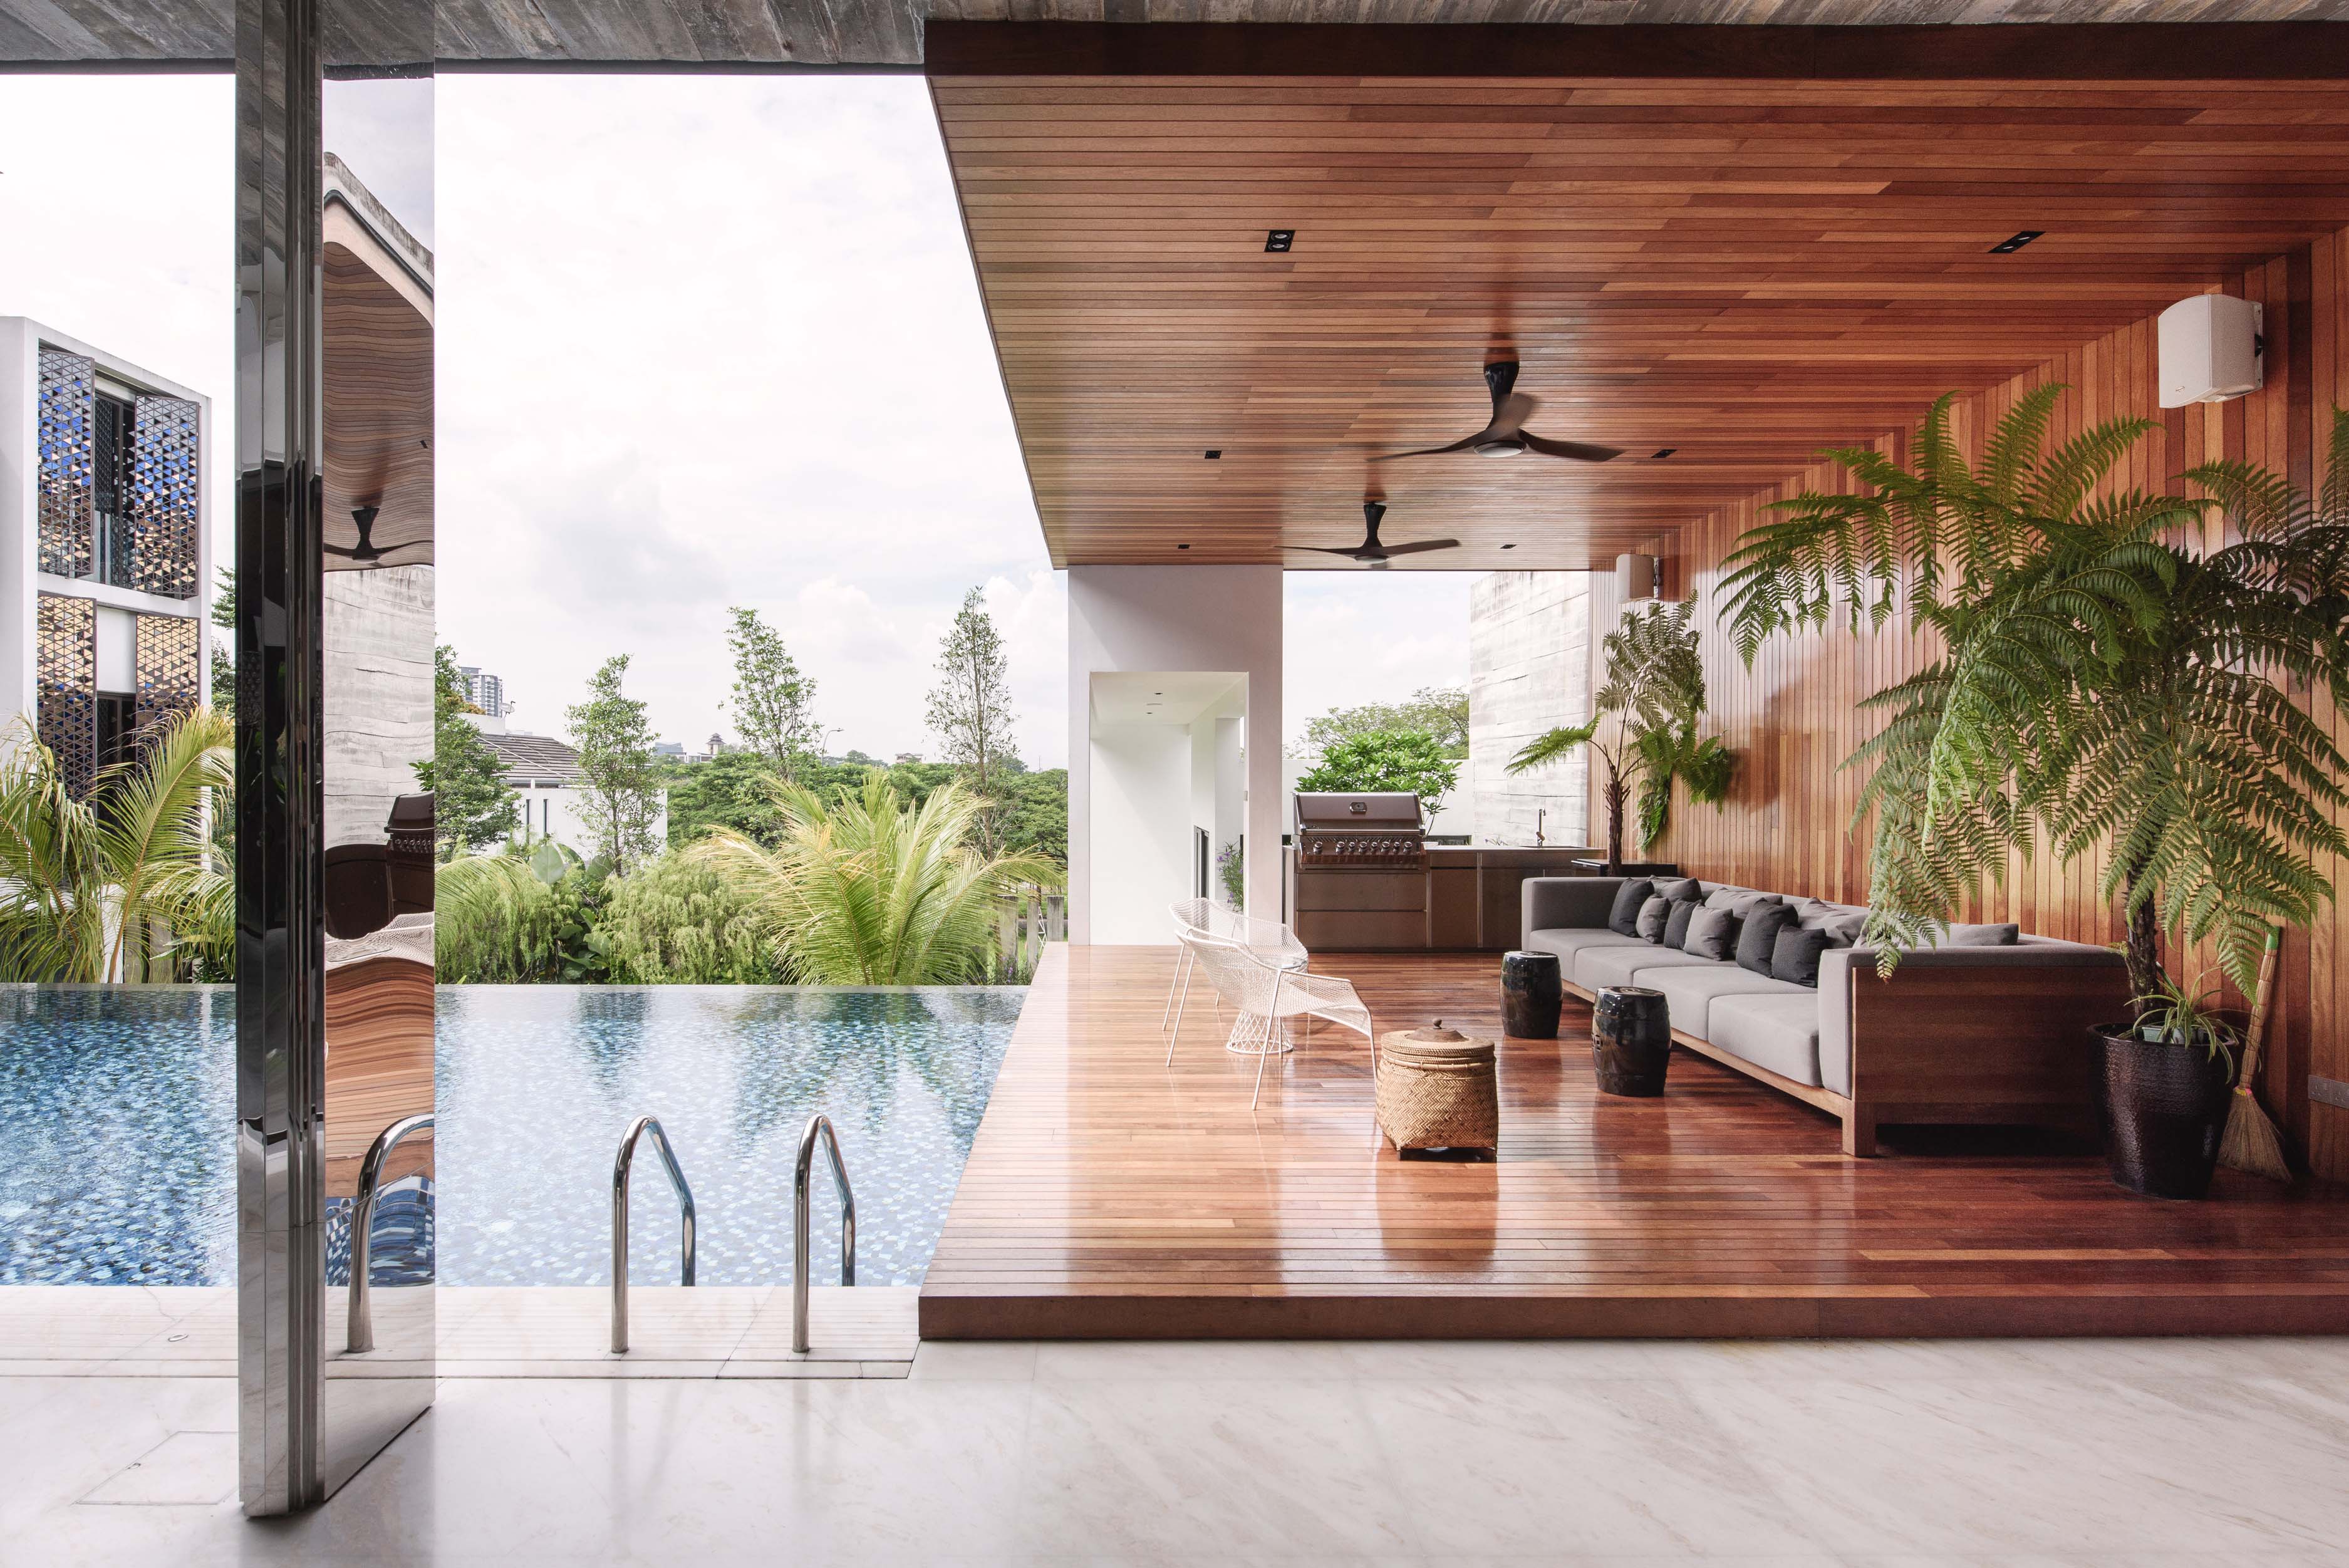 S/LAB 10 designs luxurious tropical living in Ledang 